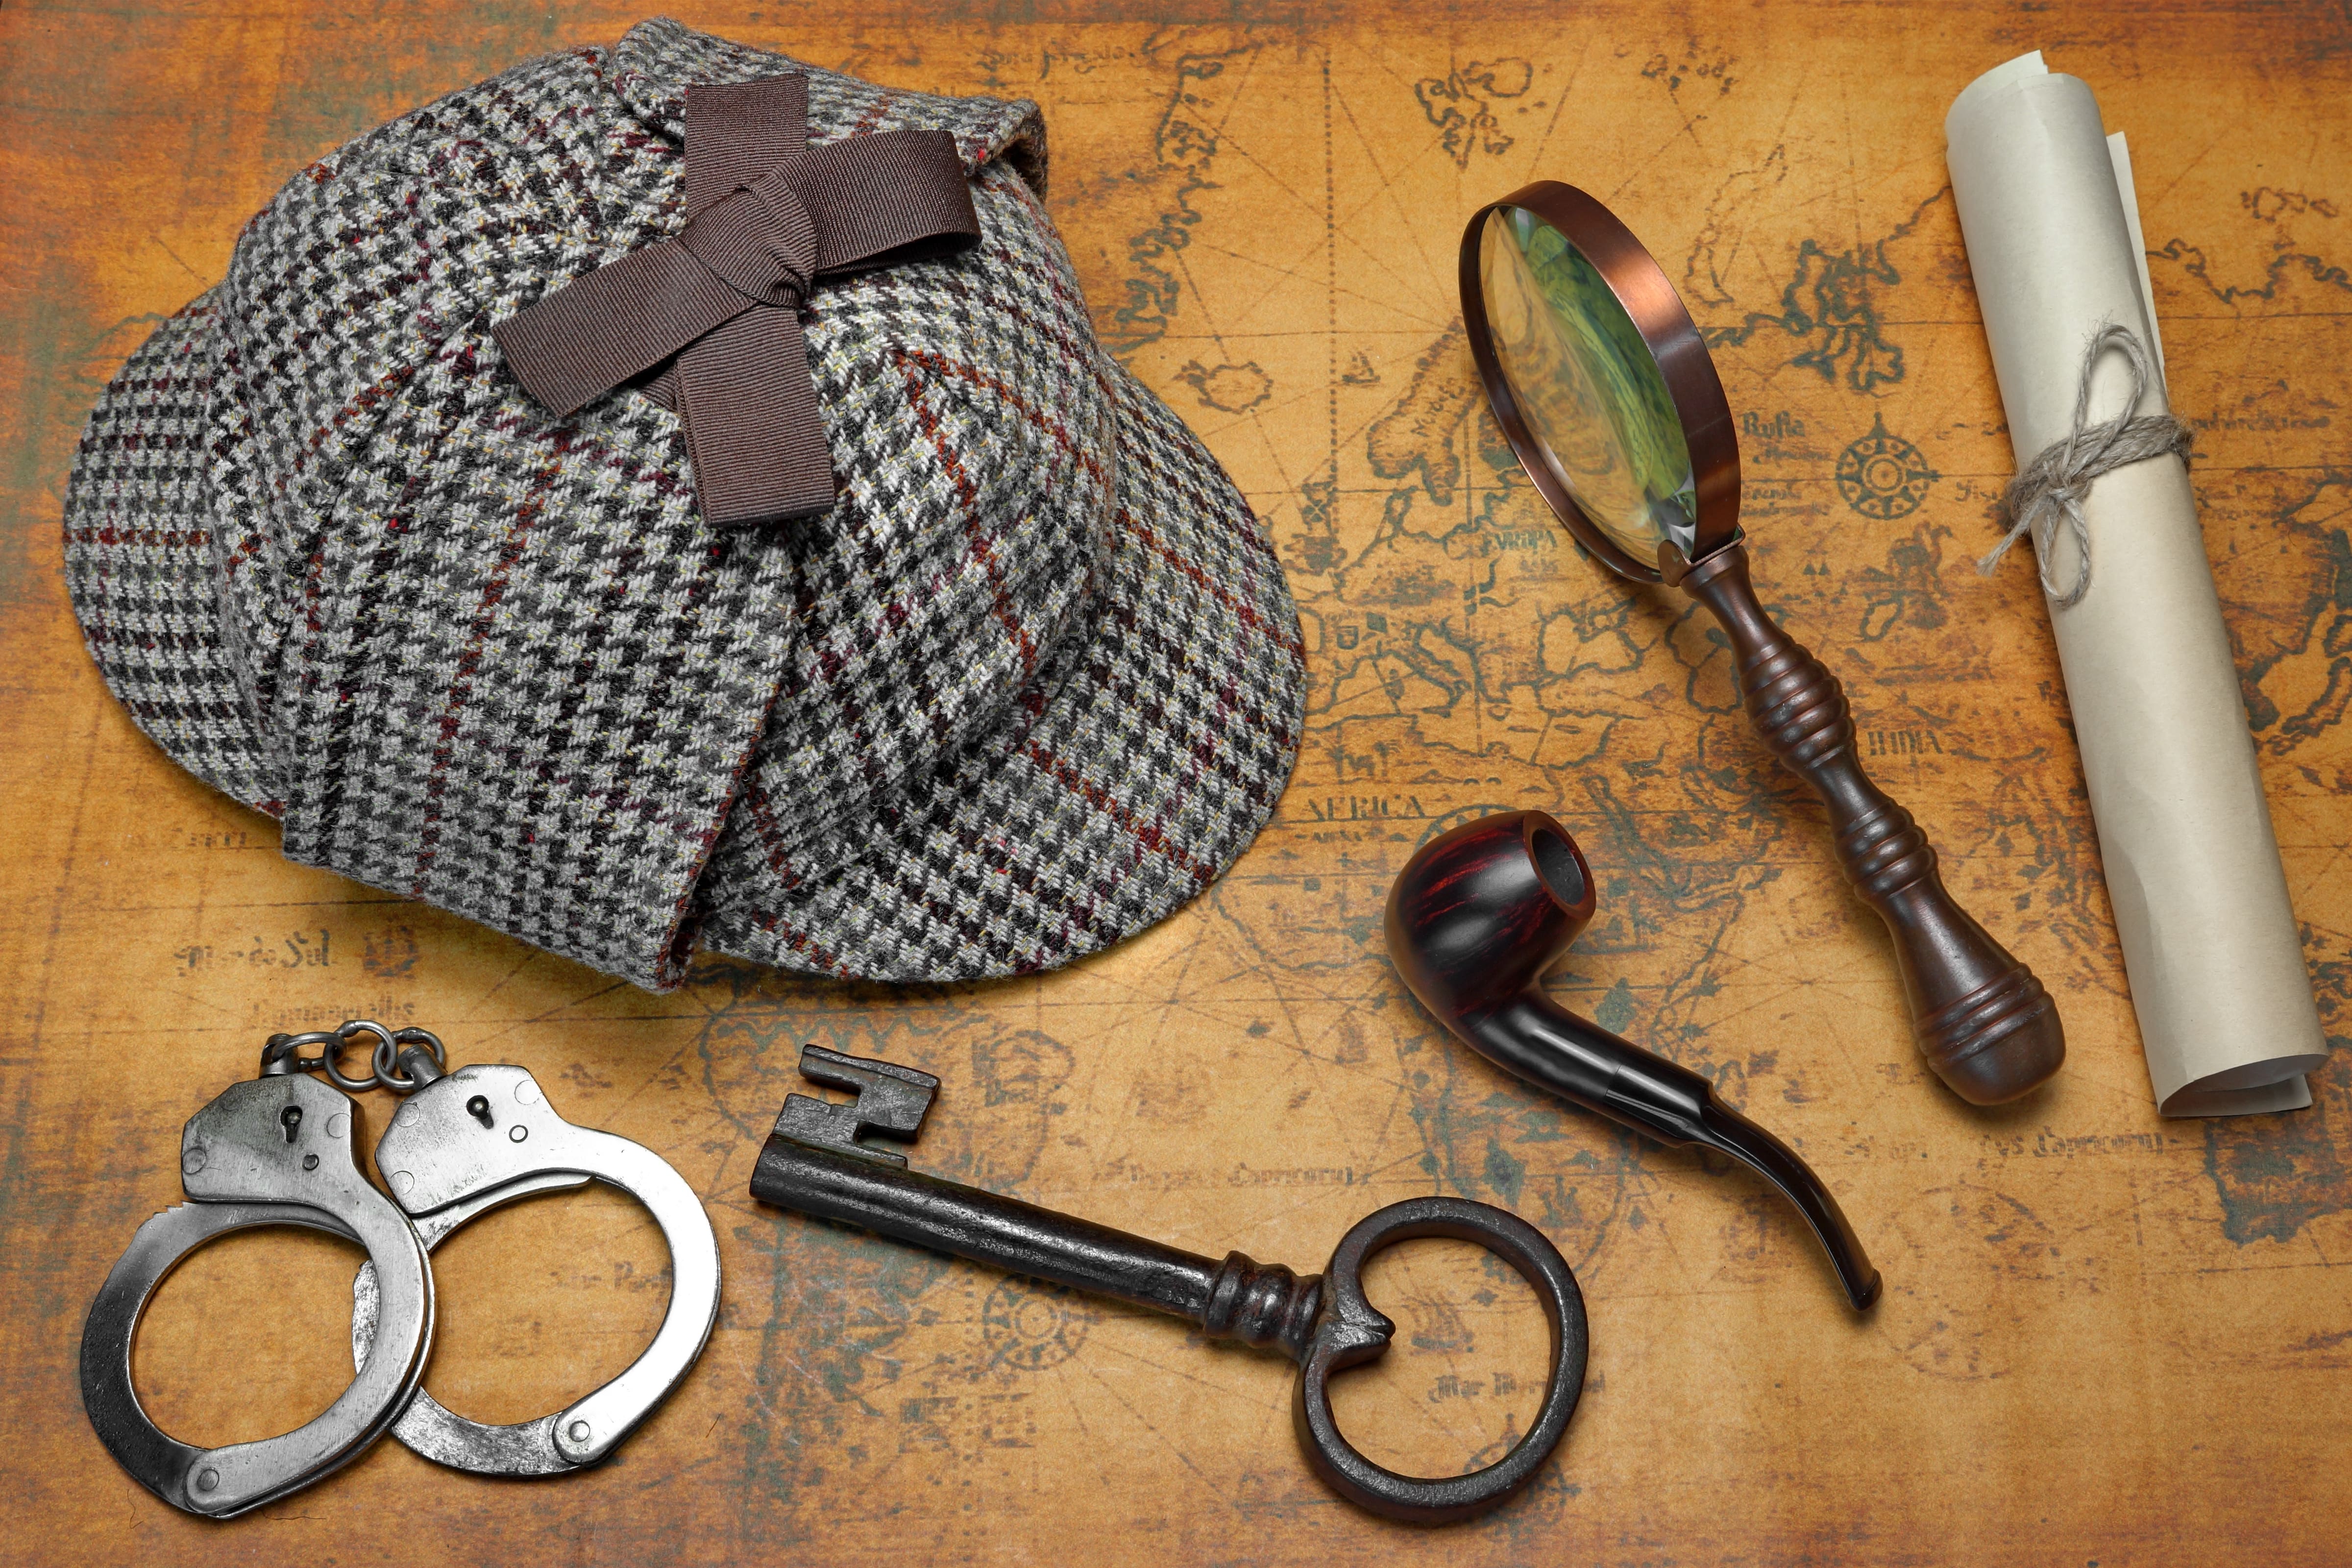 Featured image for “THE ADVENTURES OF SHERR LOCK HOLMES AND DR. WATSON KEYS”